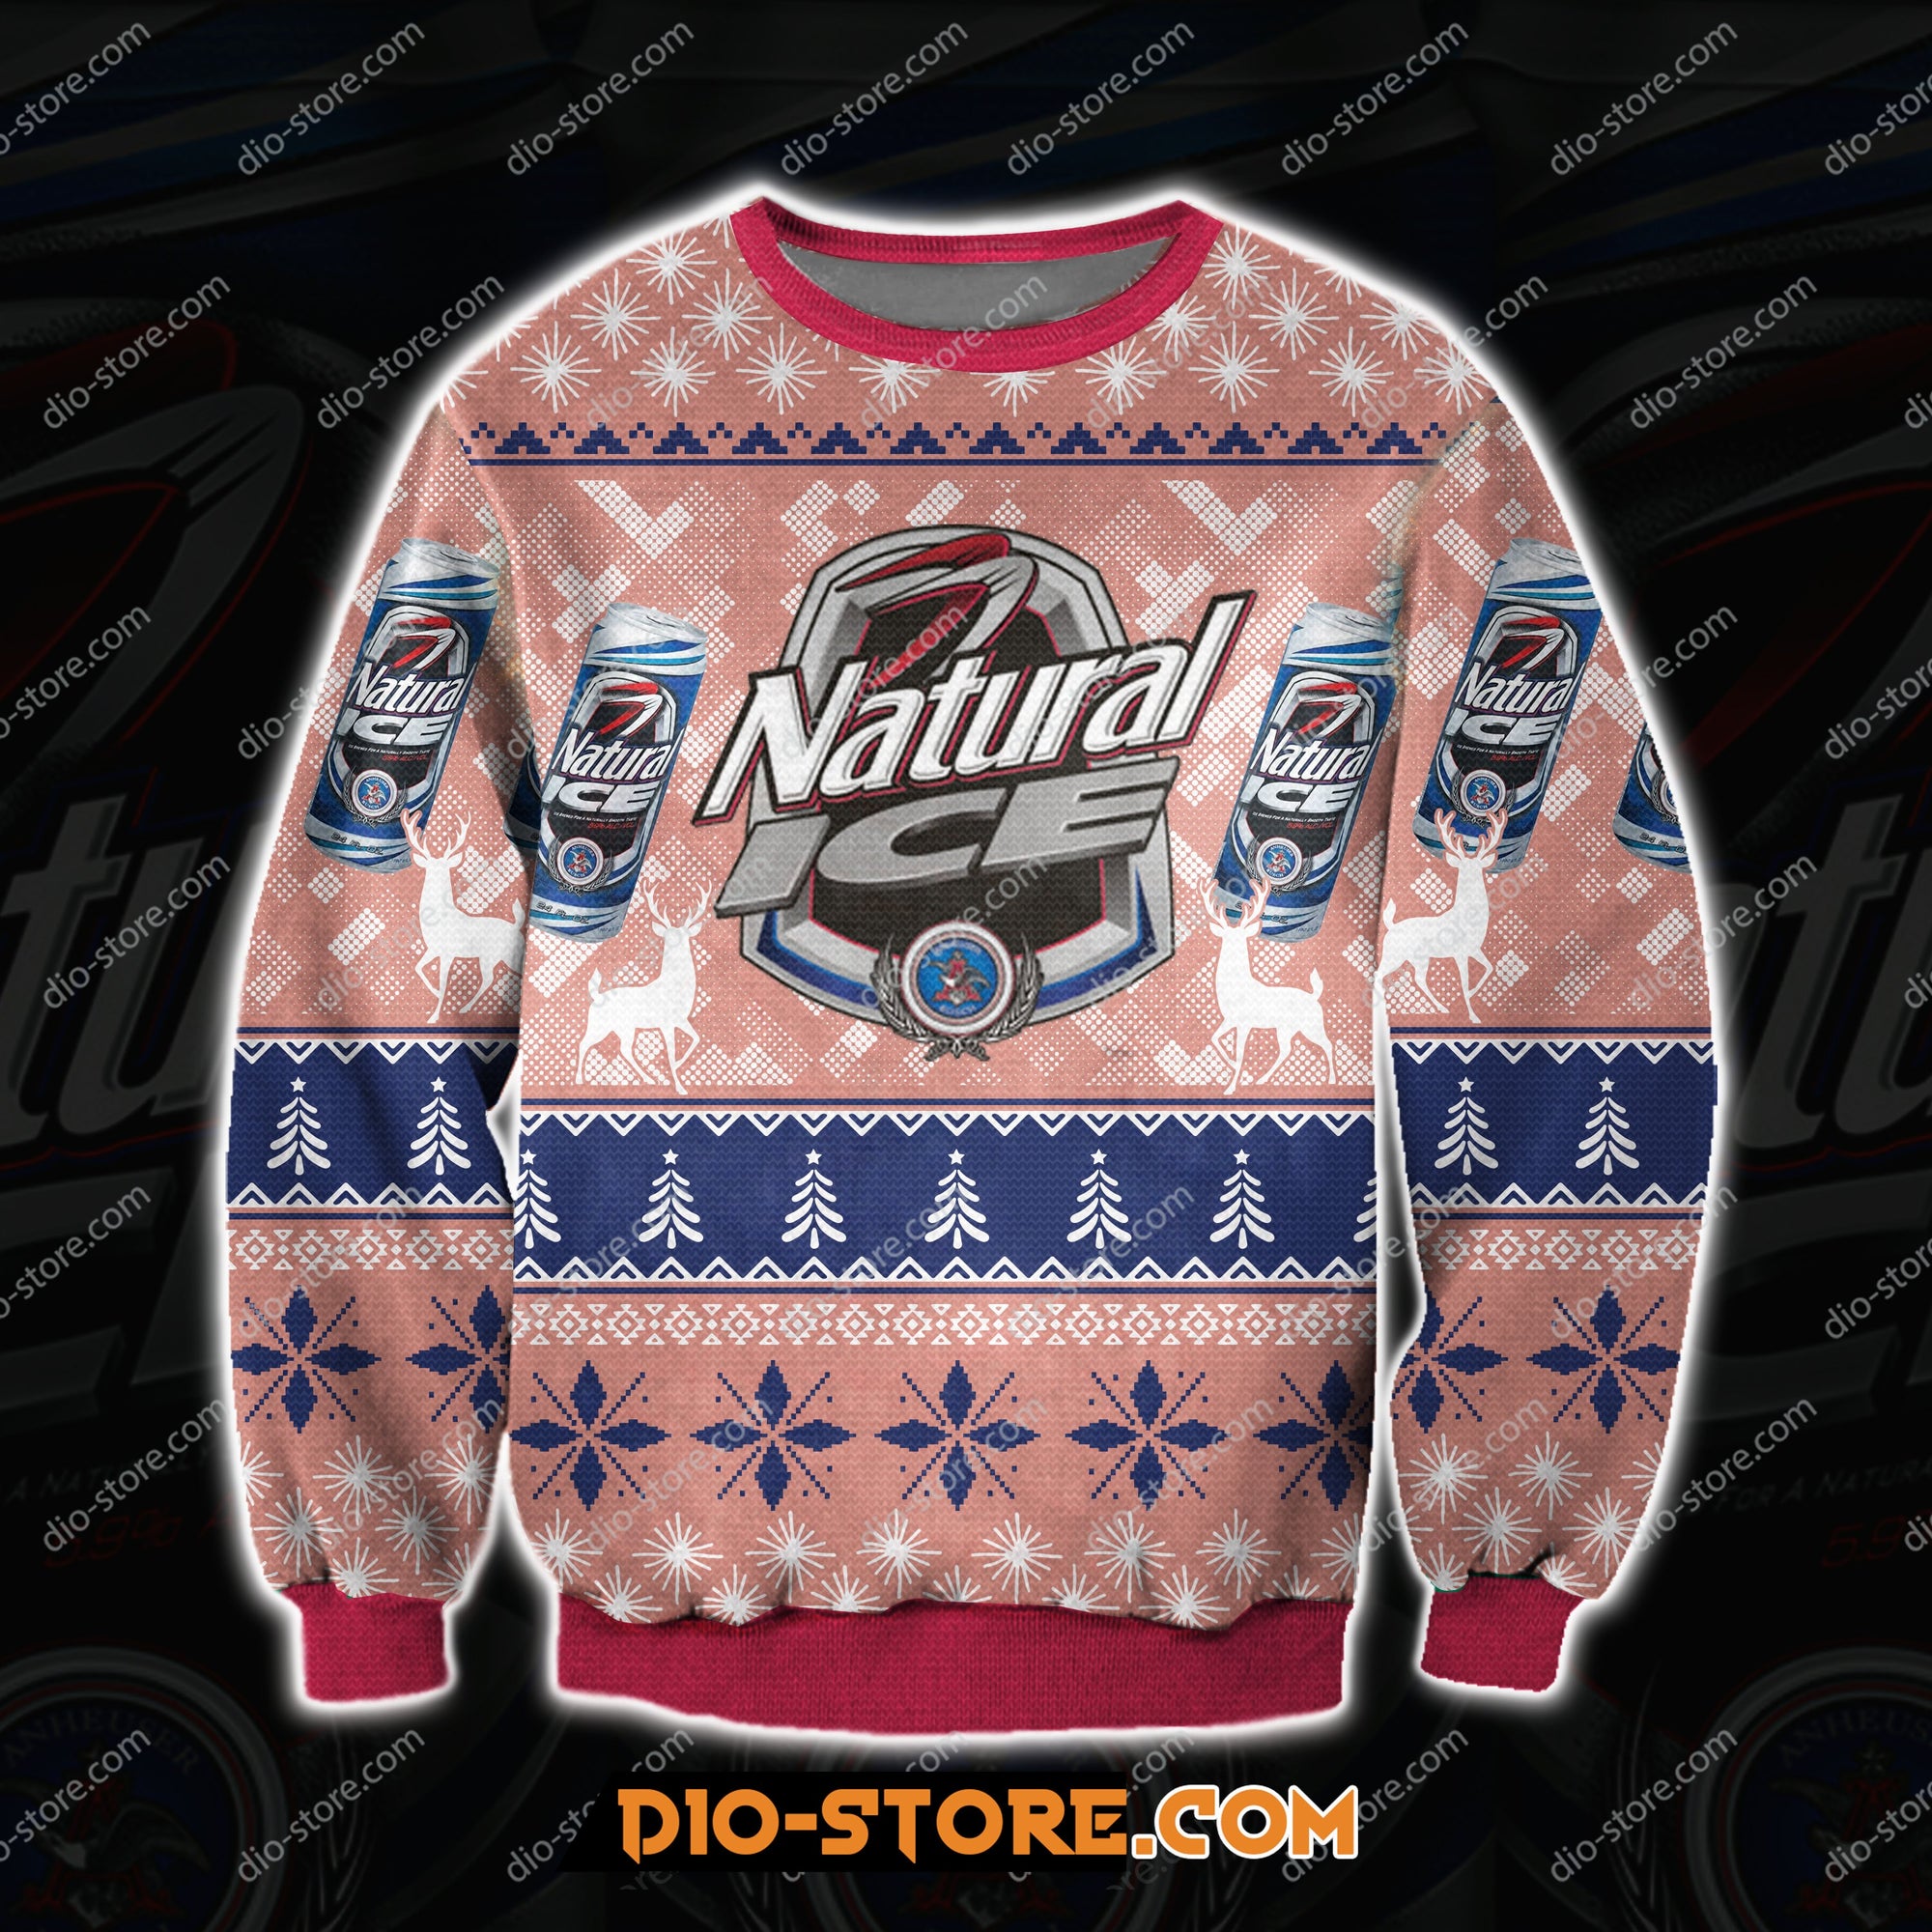 Natural Ice Beer 3D All Over Print Ugly Christmas Sweatshirt Hoodie All Over Printed Cint10337